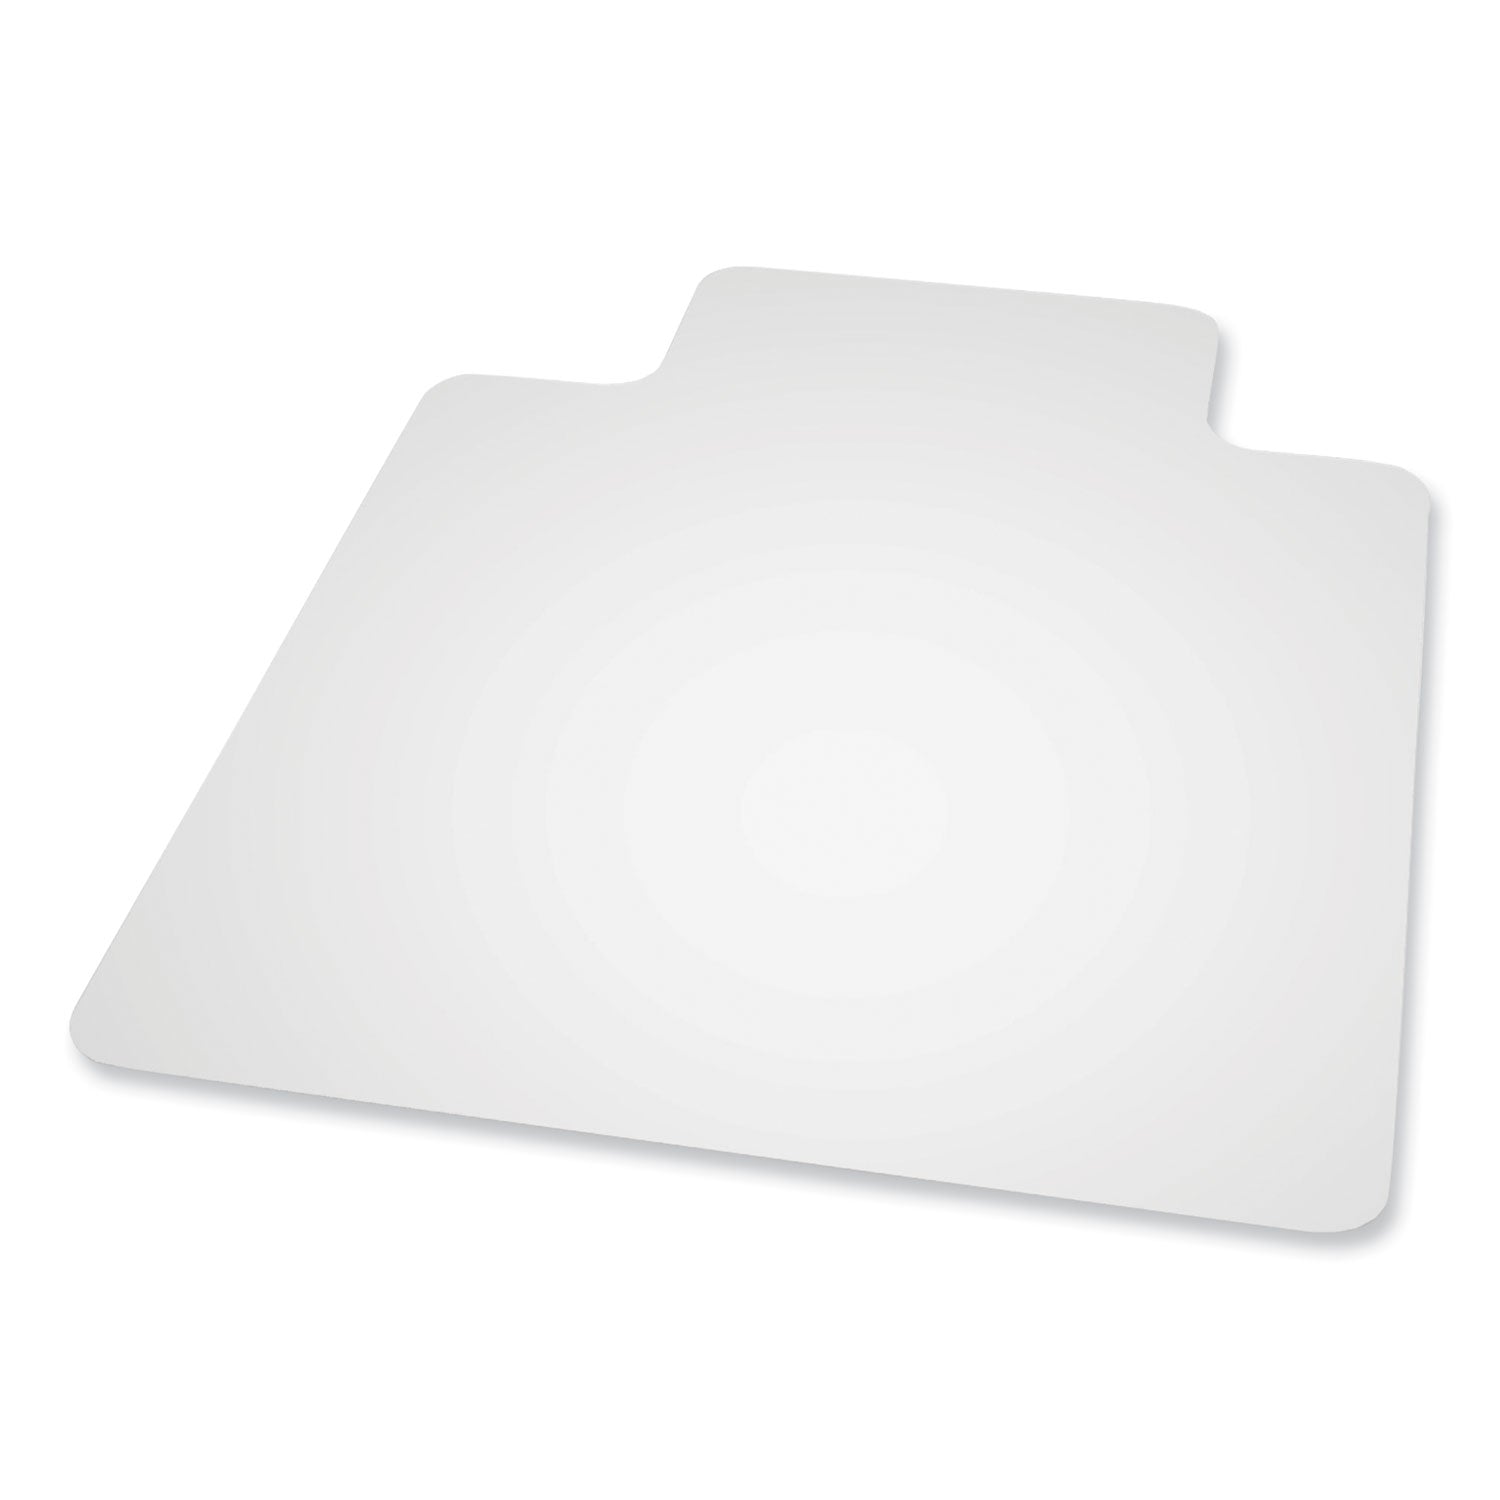 everlife-textured-chair-mat-for-hard-floors-with-lip-36-x-48-clear-ships-in-4-6-business-days_esr132033 - 1